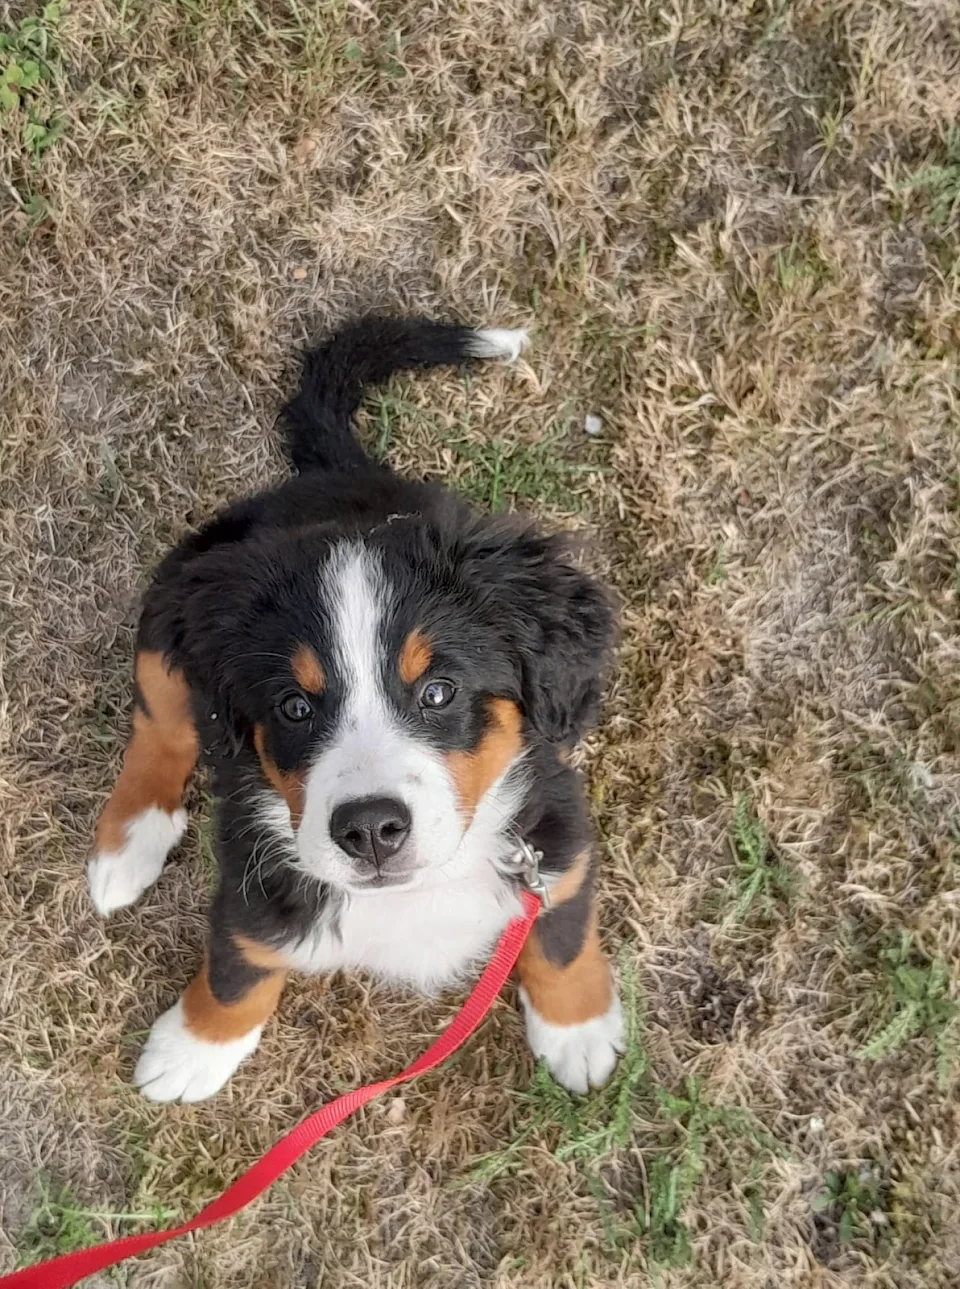 Meet Aina, the newest member of our household. She's a Bernese mountaindog 14 weeks of age.